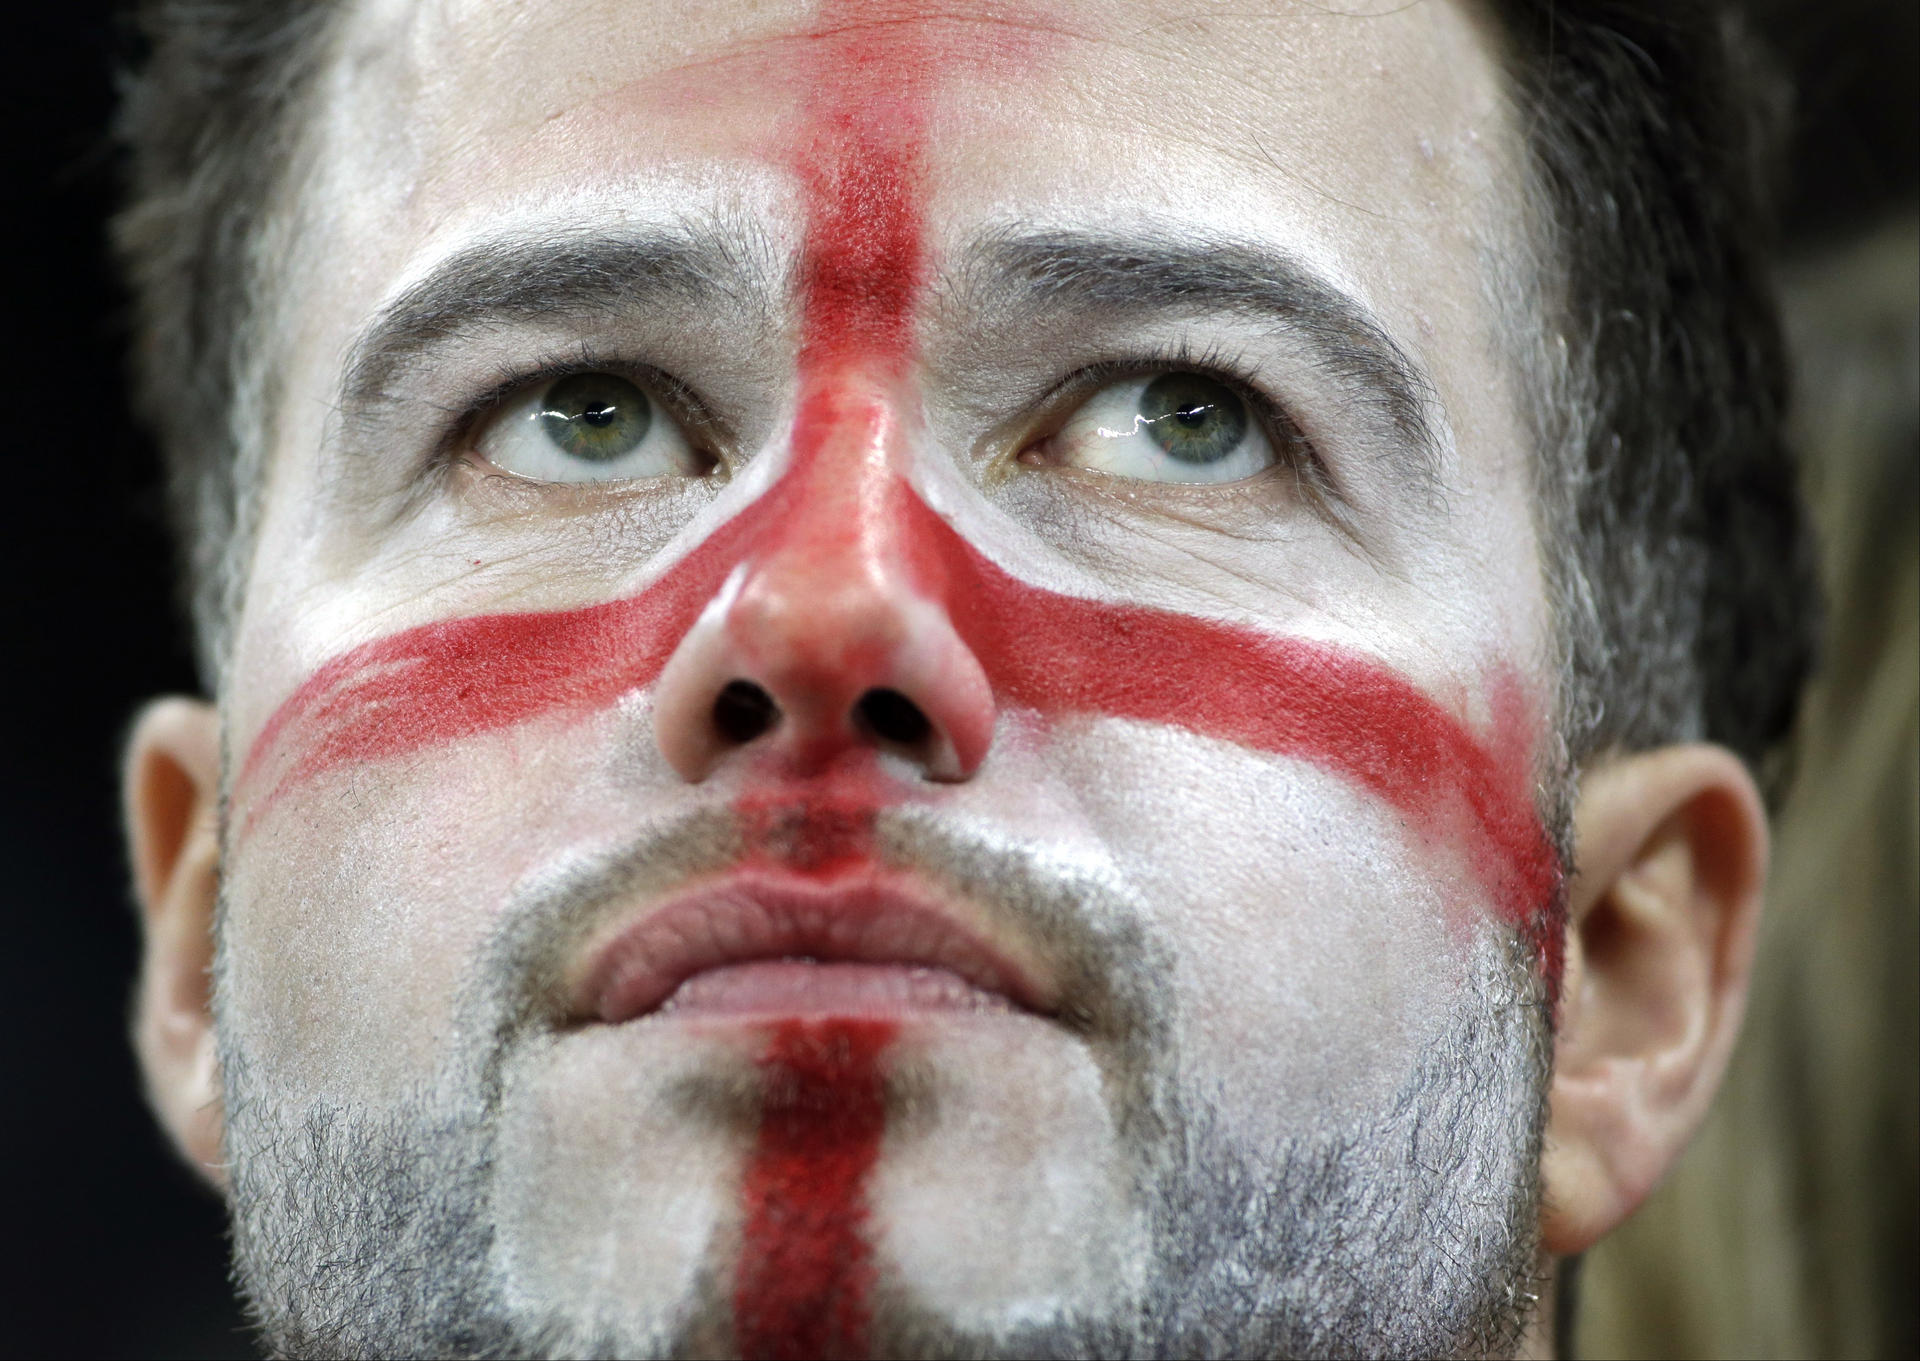 It's not easy being an England supporter at the moment. Photo: AP